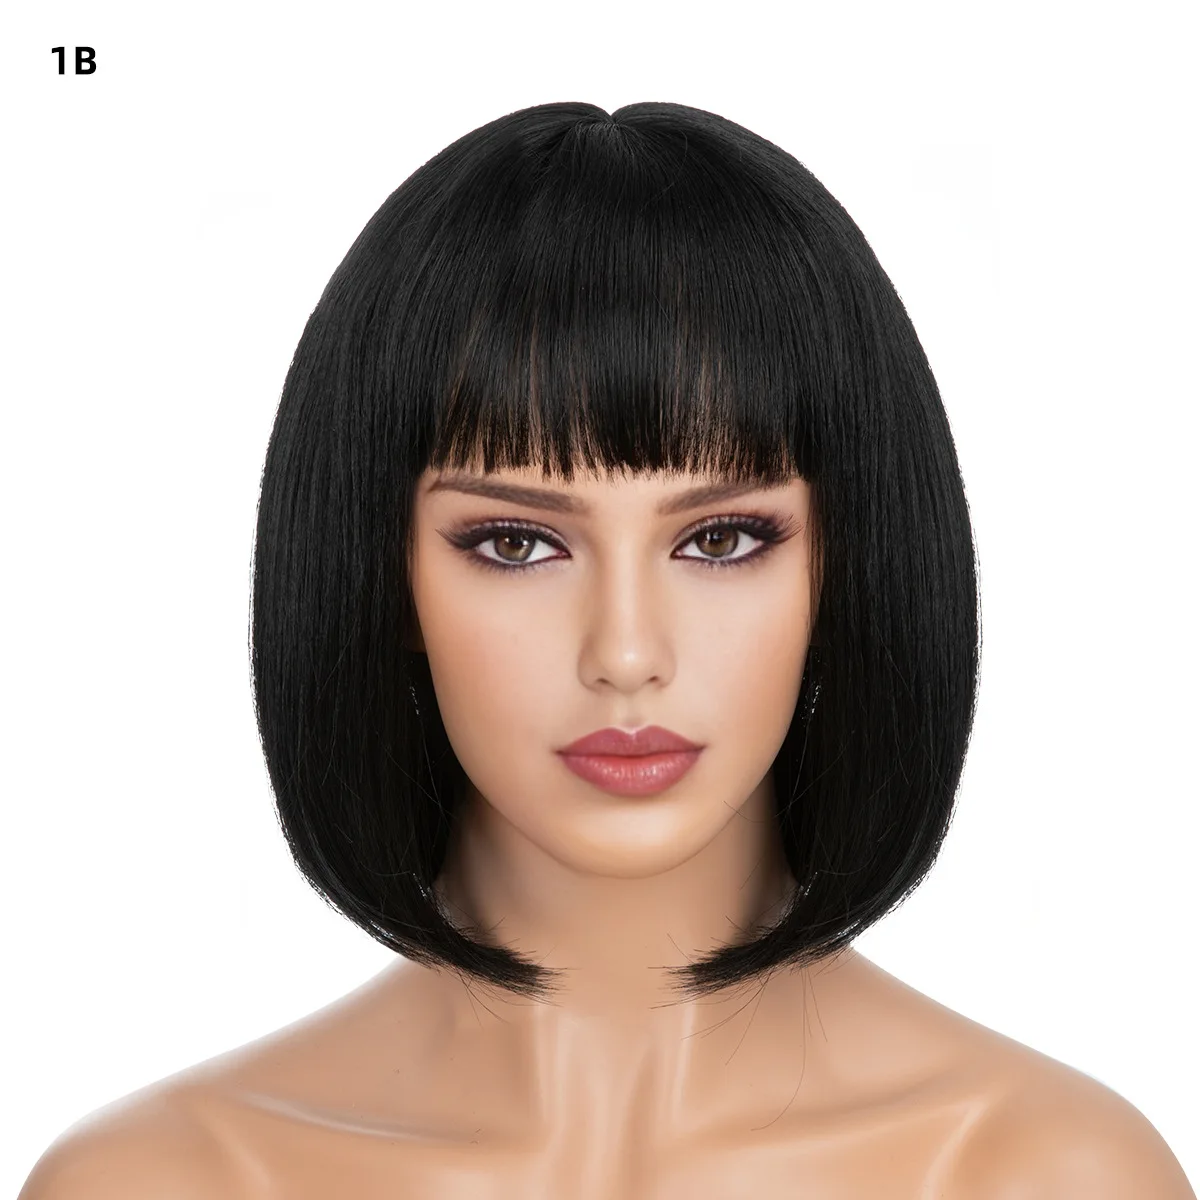 

Short Black Straight Synthetic Wigs with Bangs for Women Bob Violet Highlights Hair Wig Daily Party Use High Temperature Hair